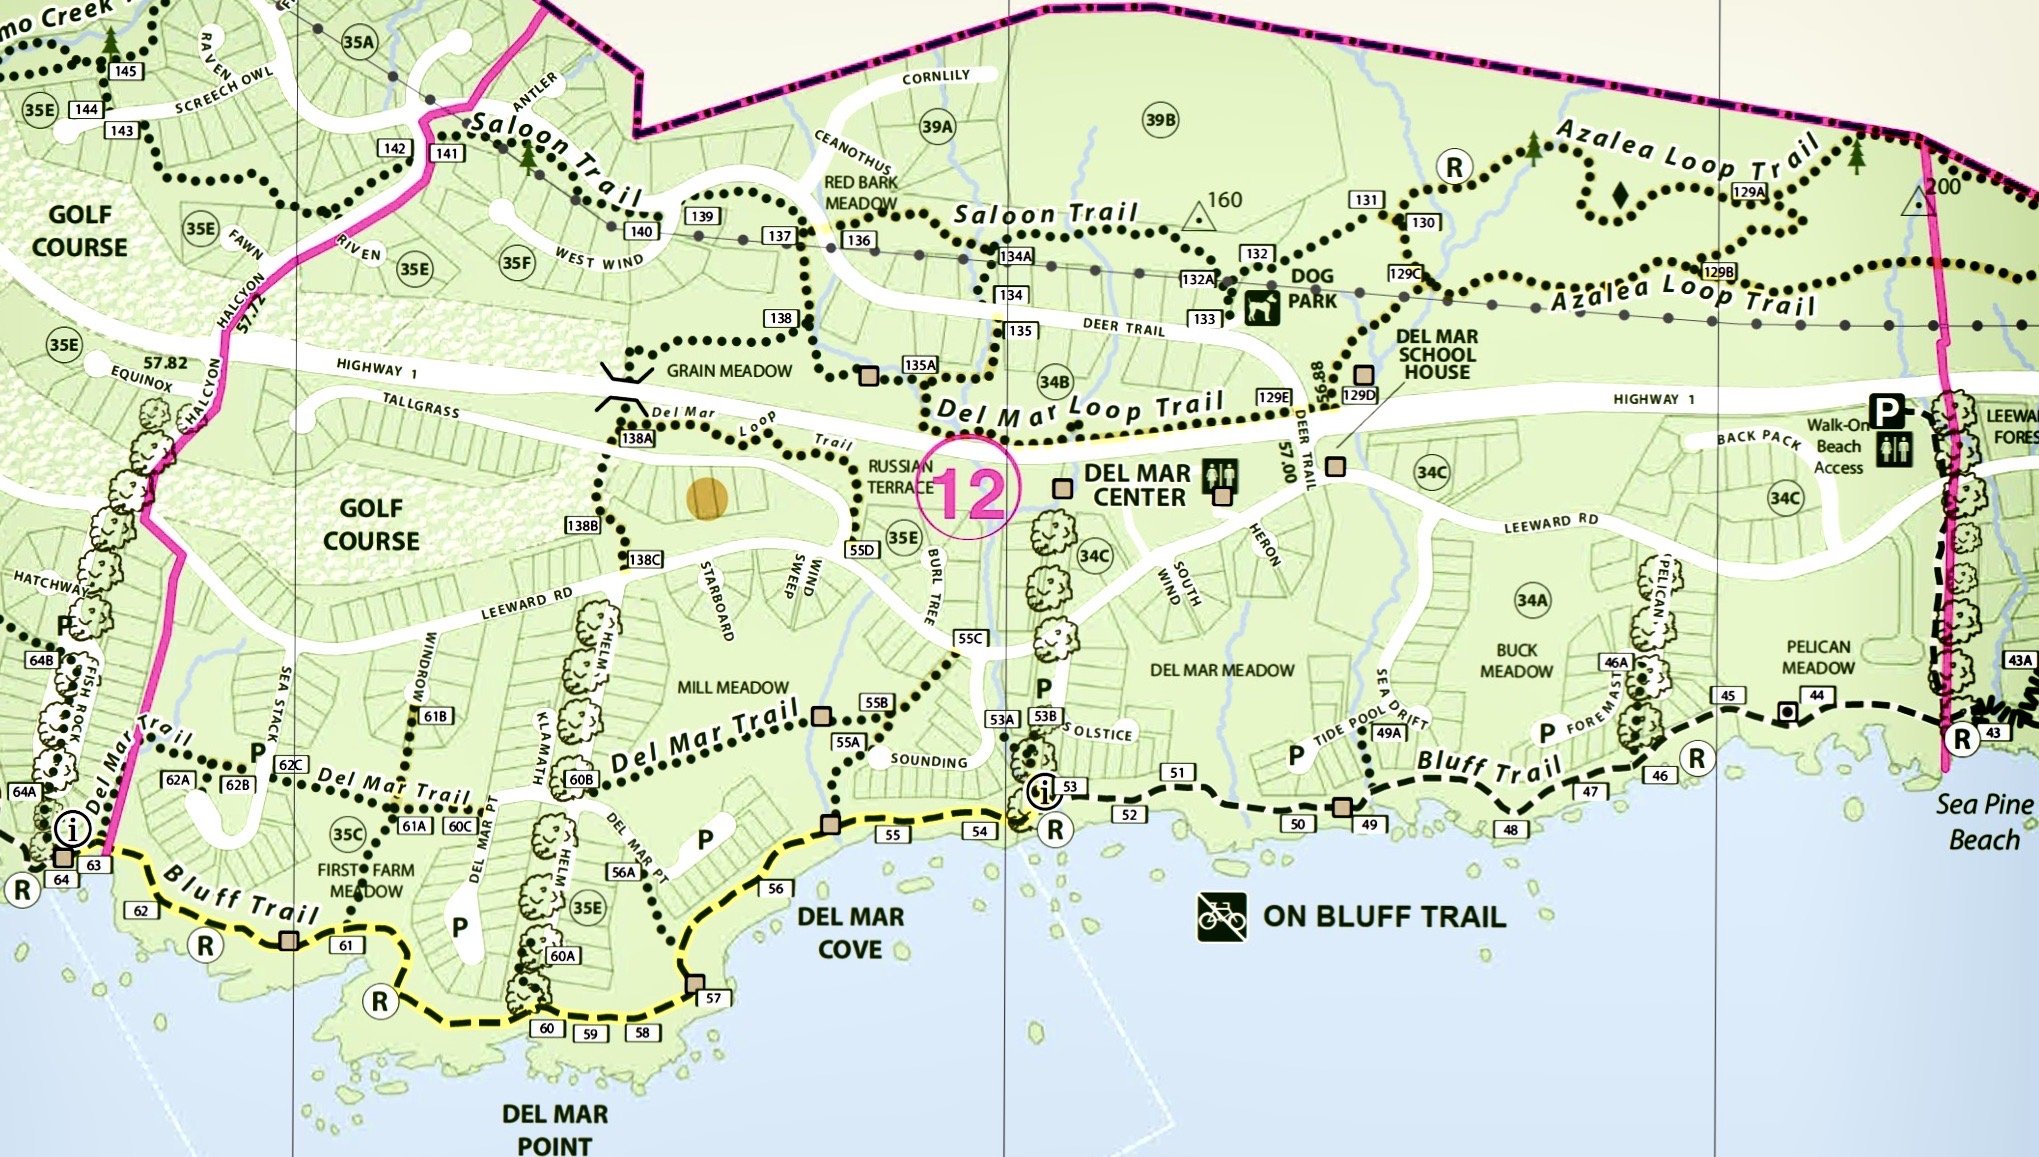 Bella Vista (yellow dot) overlooks the coast right and left far beyond the end of the map. 